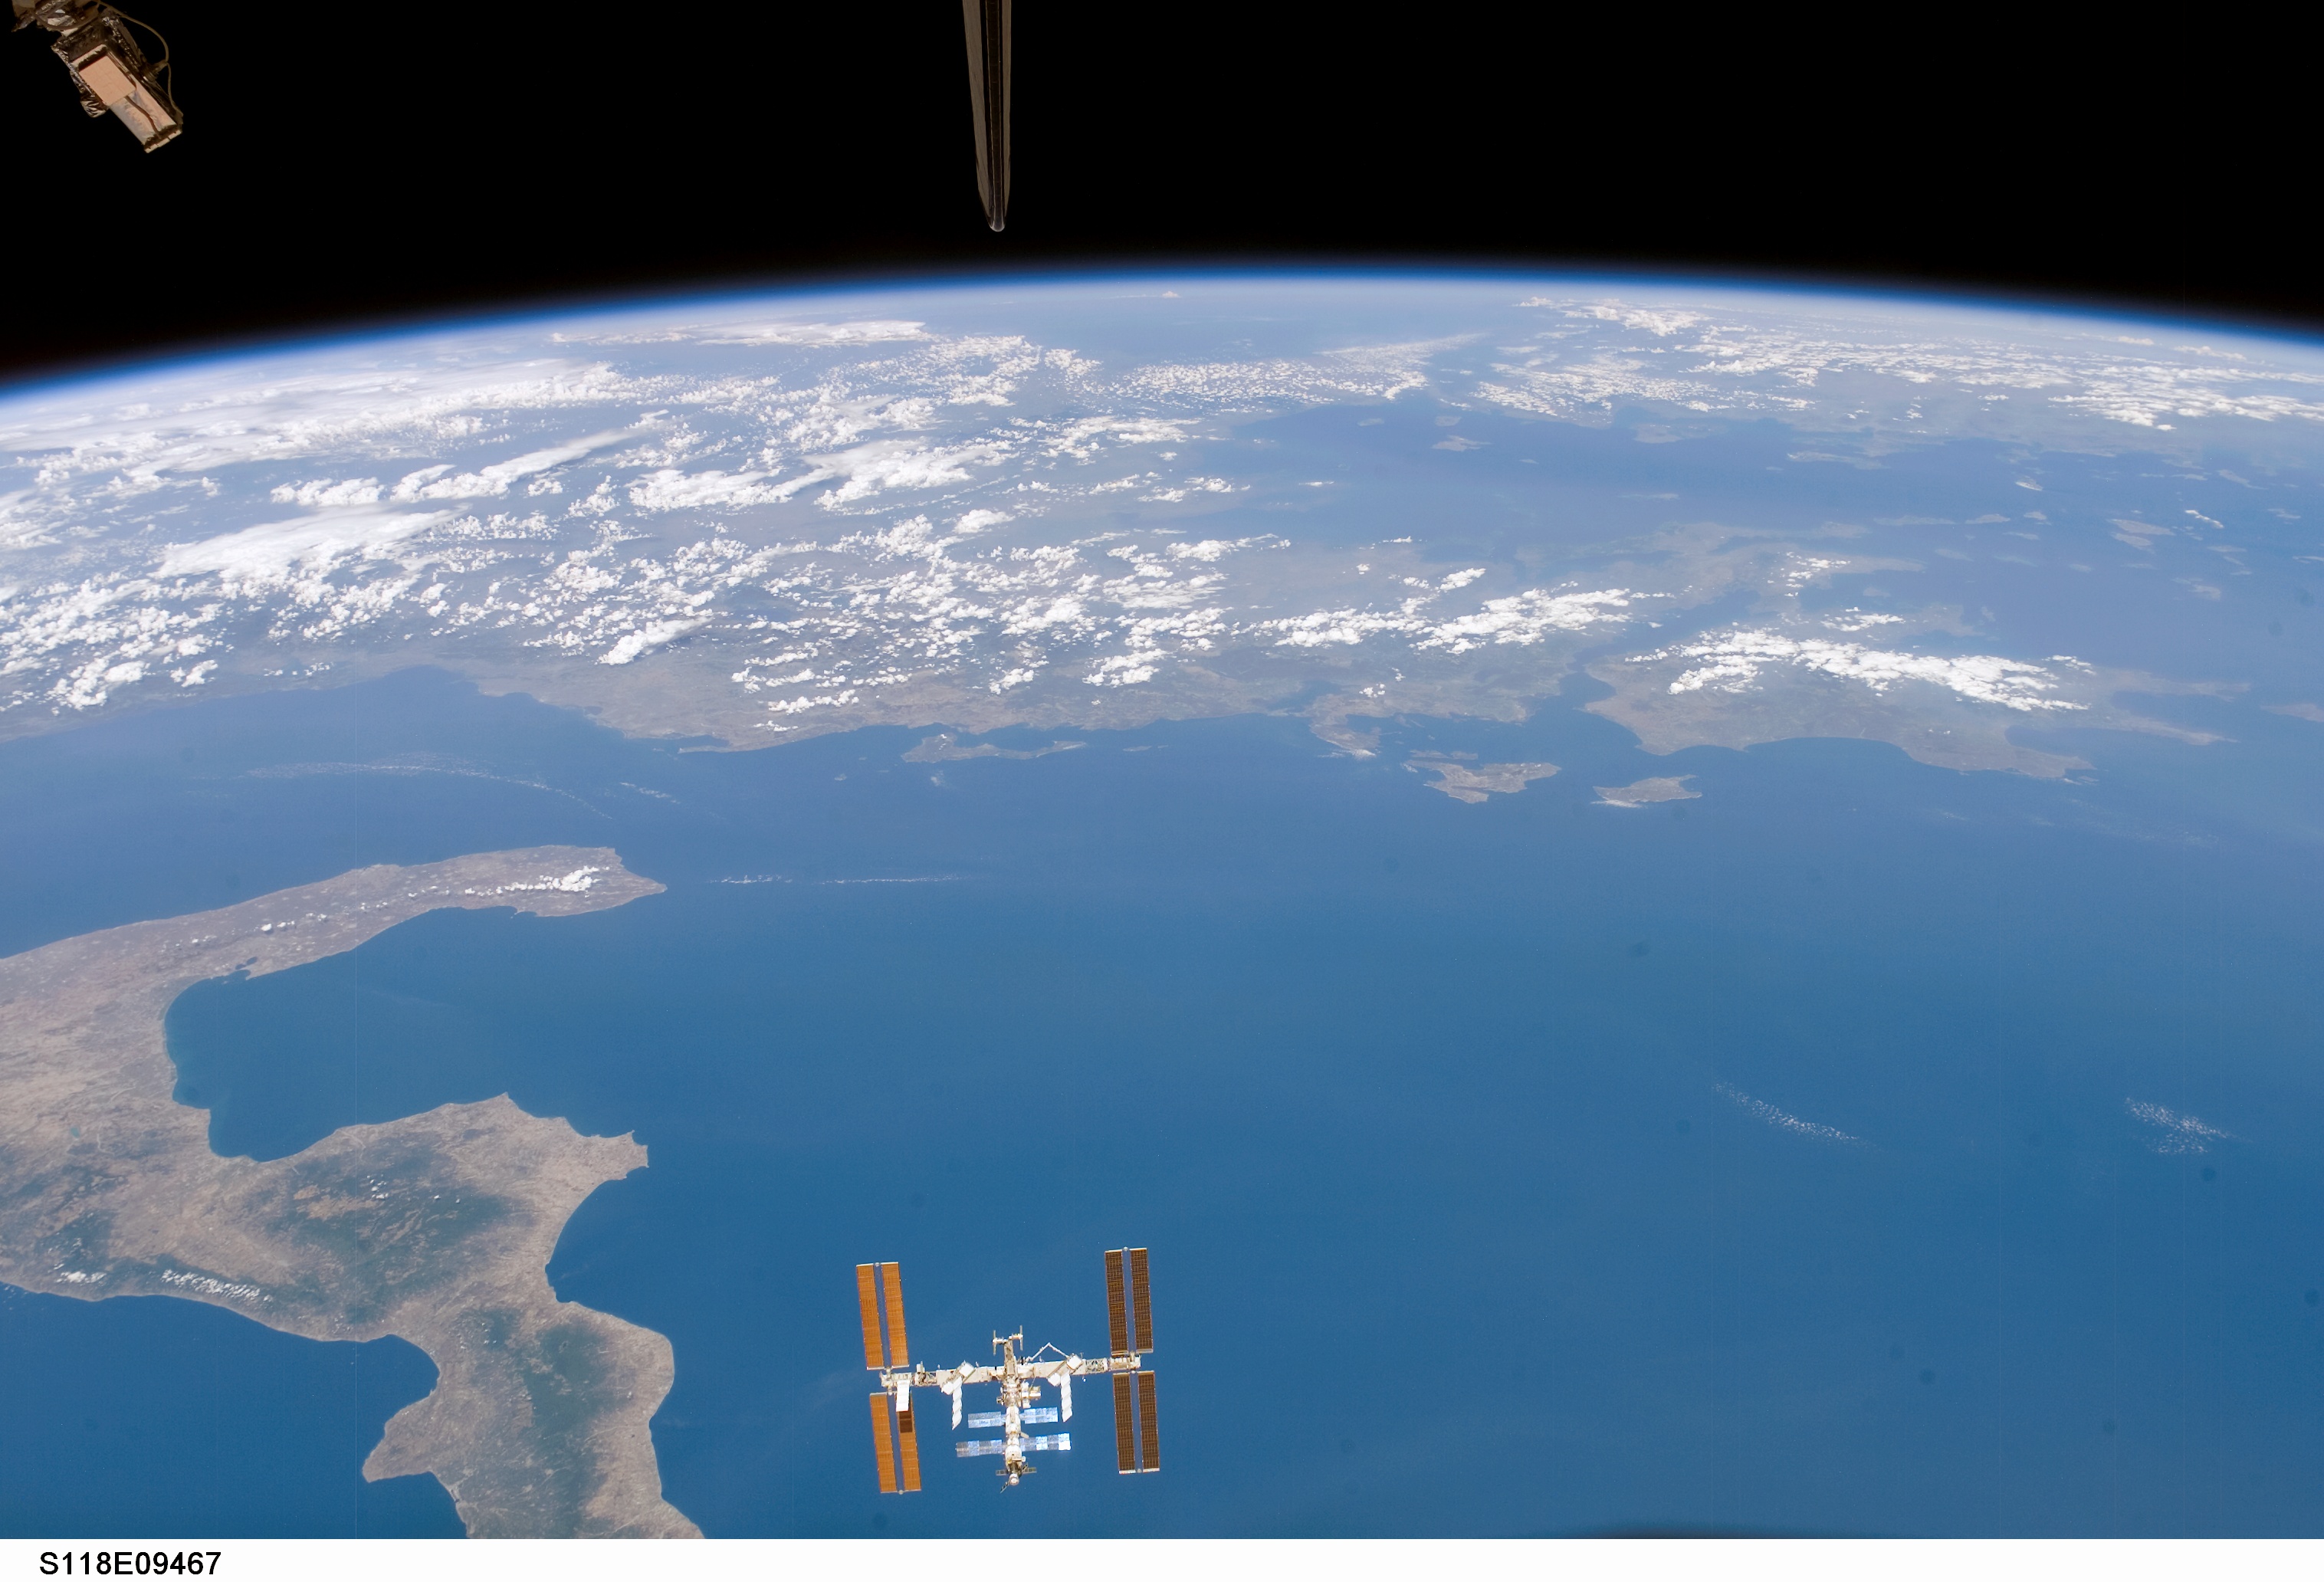 Space in Images - 2007 - 09 - International Space Station (ISS) view ...